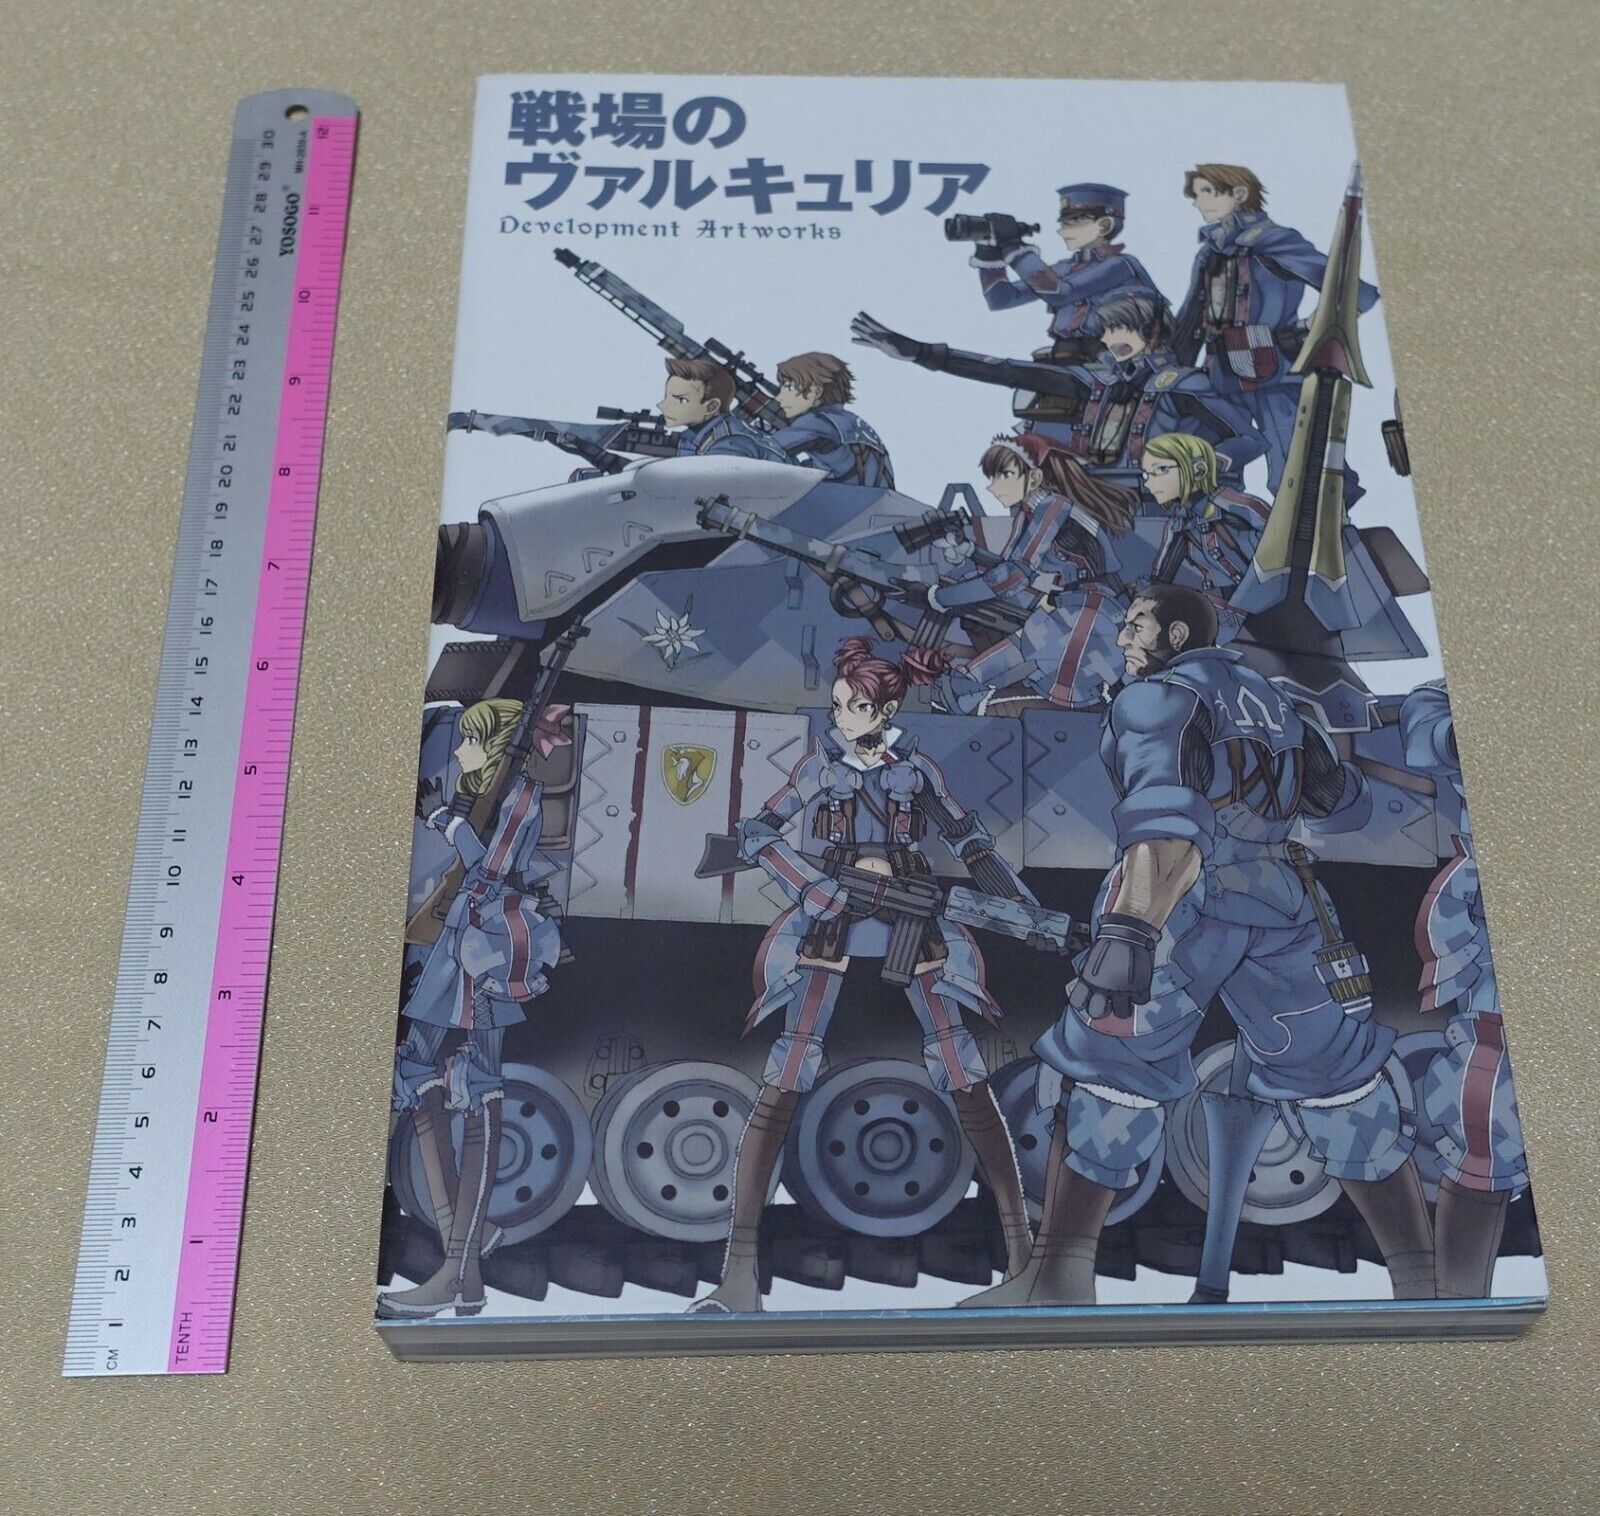 Valkyria Chronicles Development Artworks Setting Art Collection Book 400 page